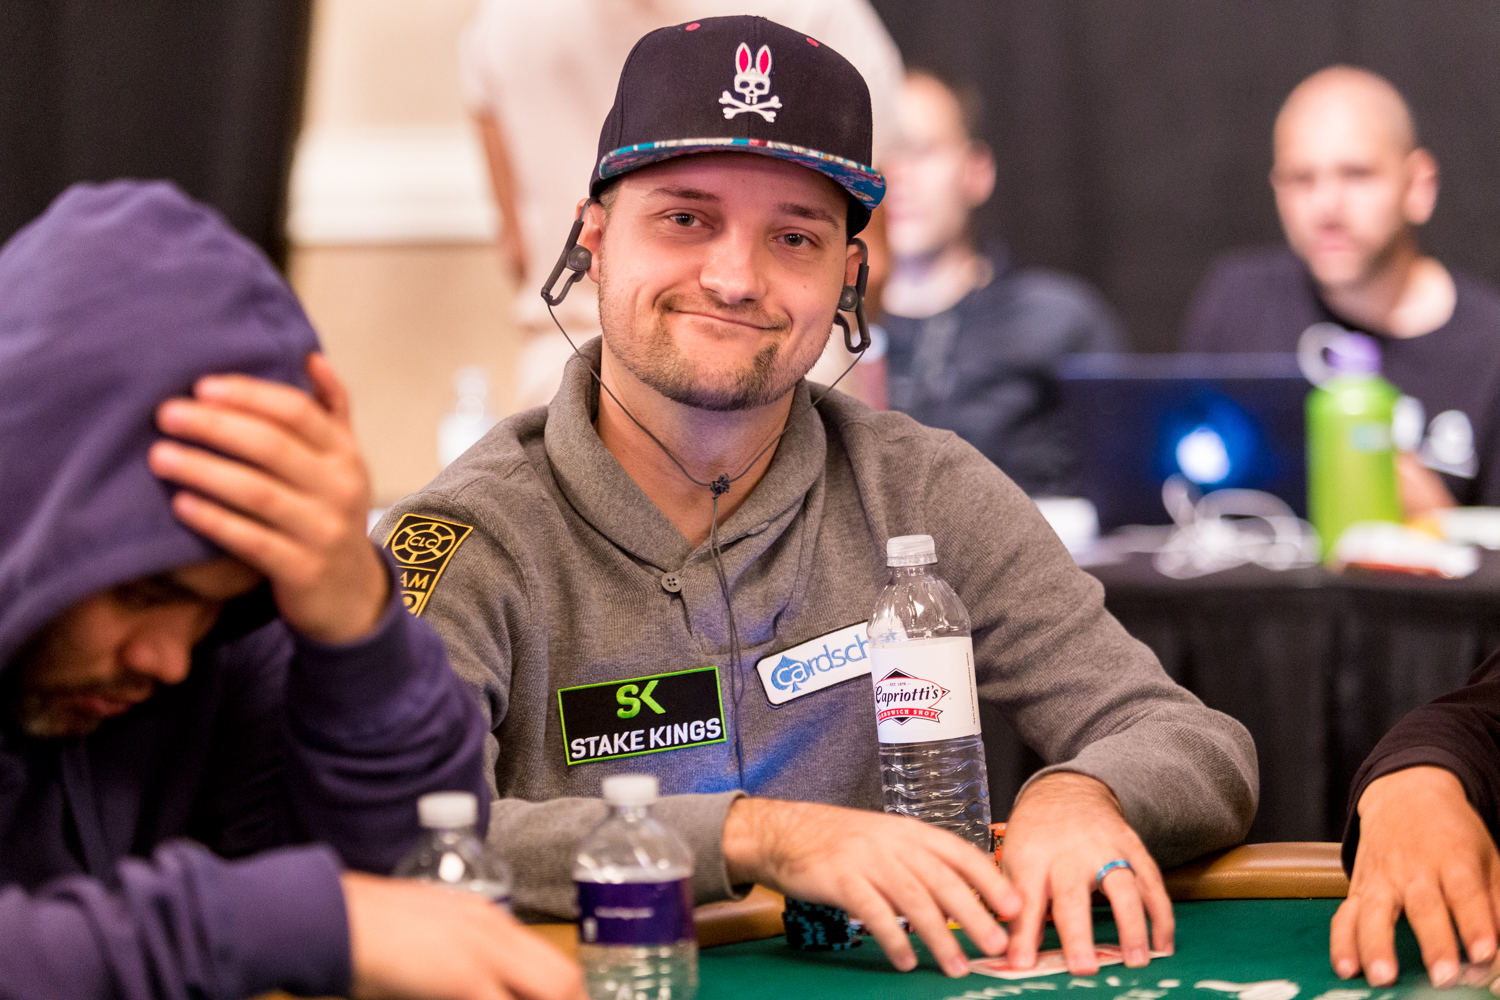 Interview: Ryan Laplante Discusses New Training Site Learn Pro Poker